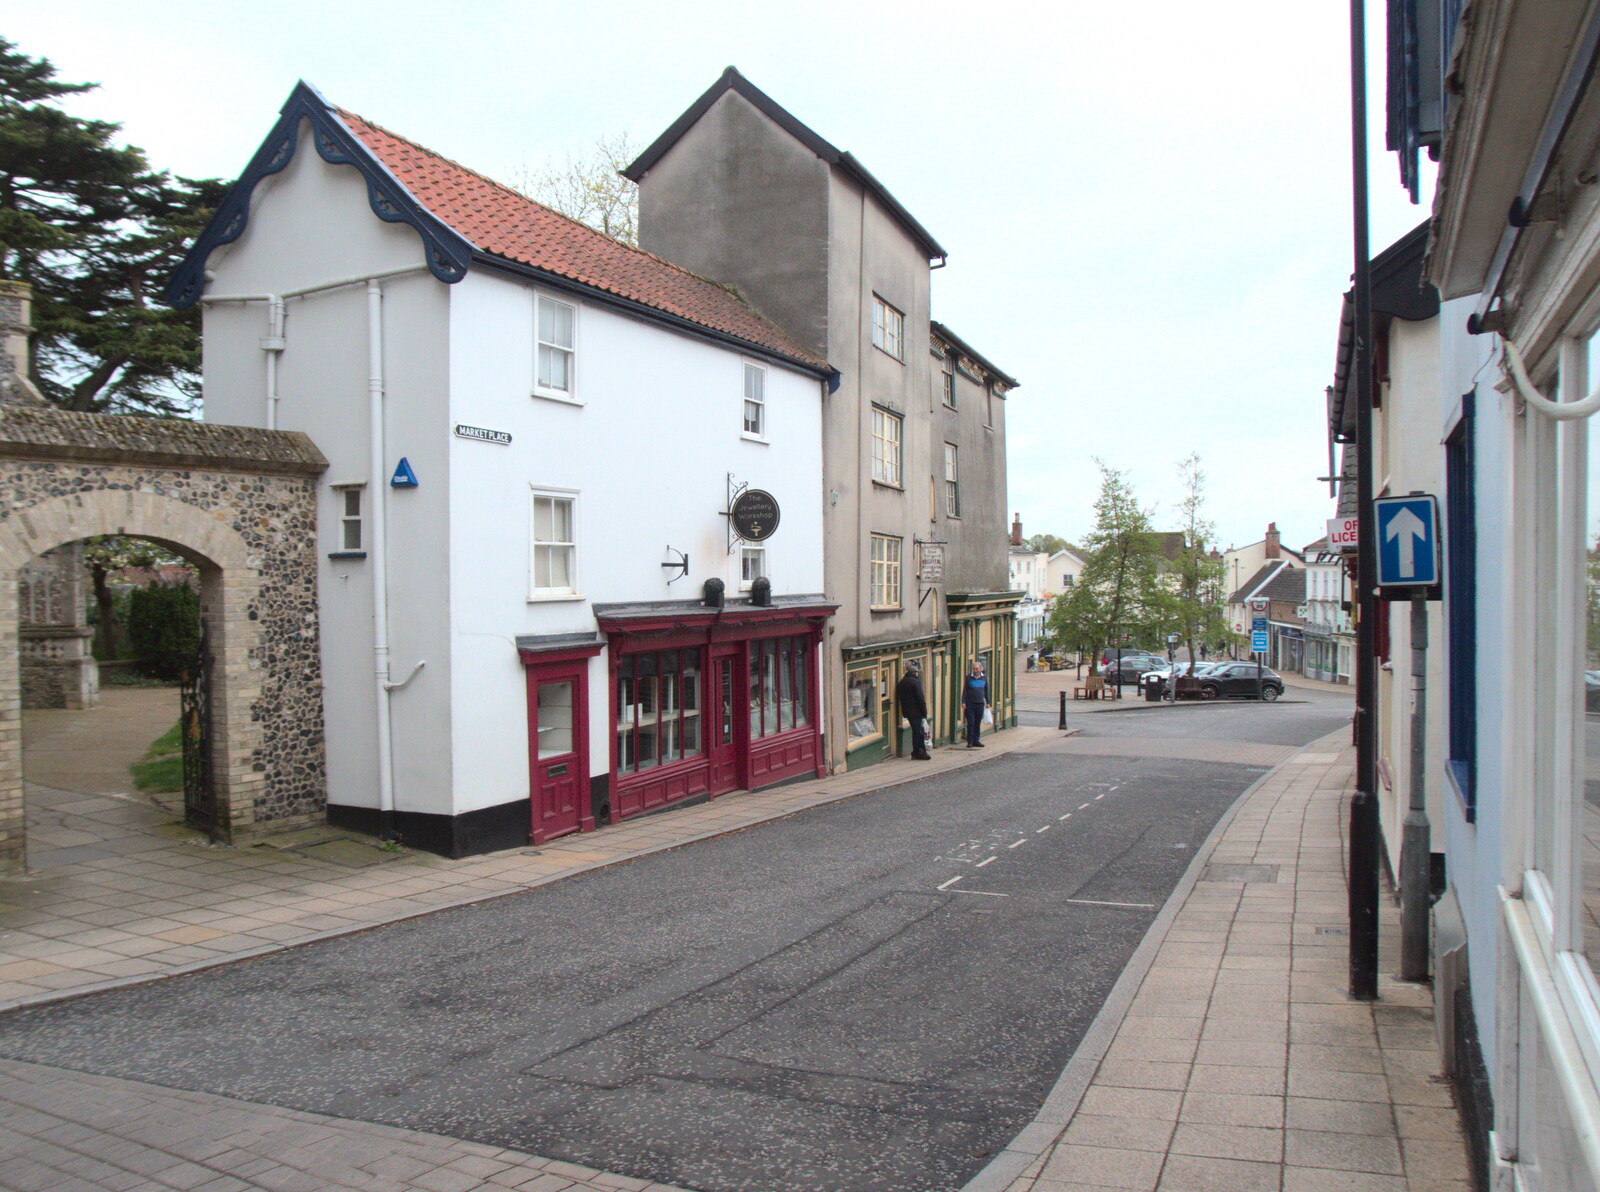 Market Place in Diss is a bit quiet from The Lockdown Desertion of Diss, and a Bike Ride up the Avenue, Brome - 19th April 2020